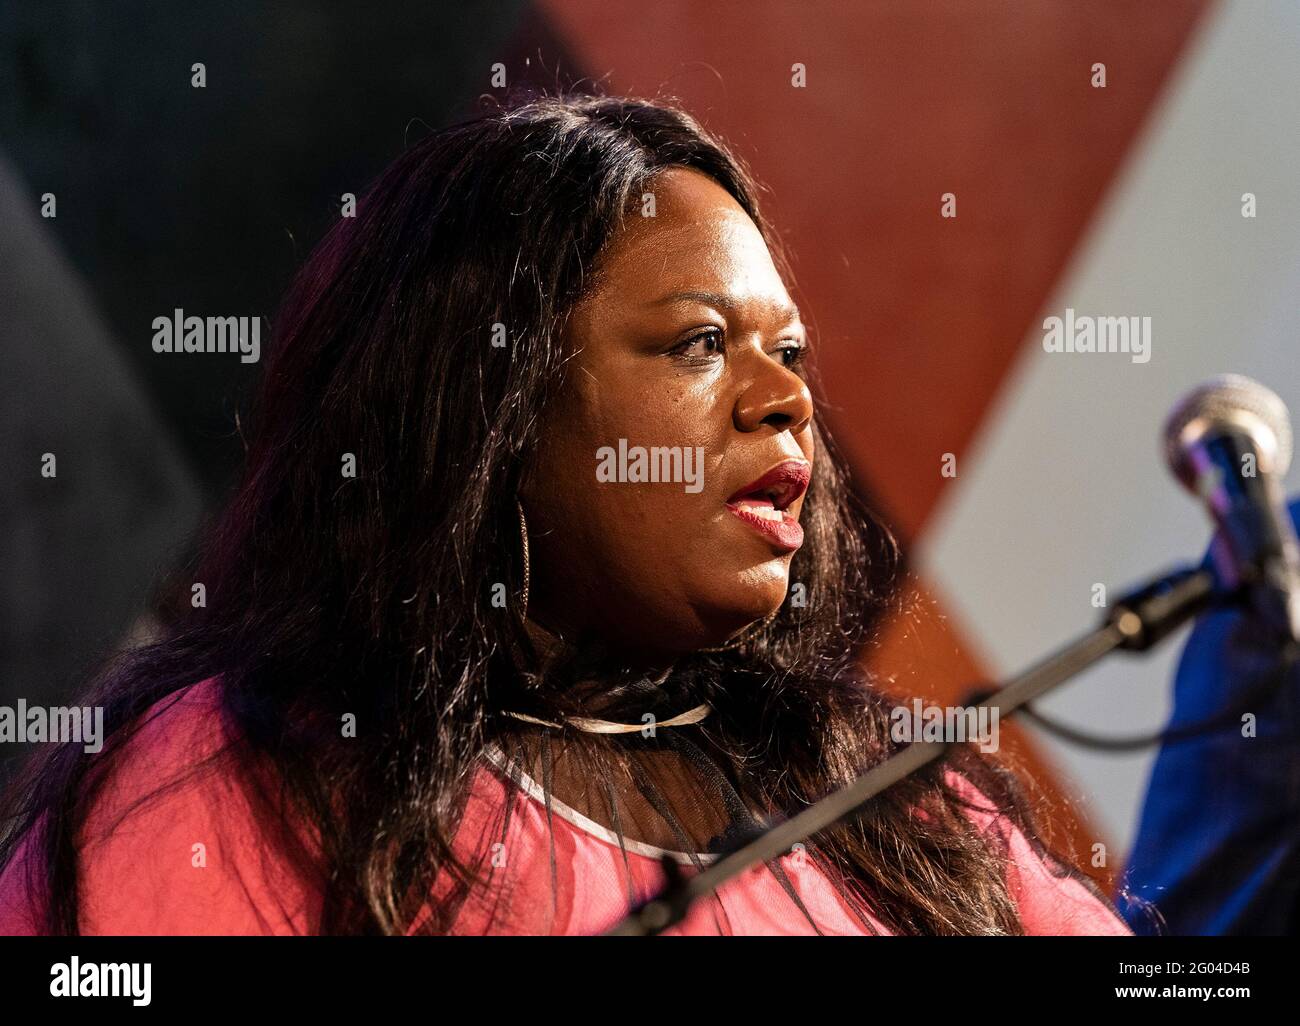 New York, United States. 31st May, 2021. Comedian Yamaneika Saunders speaks at Carolines on Broadway comedy club re-opening after pandemic ceremony. Senator Charles Schumer lauded Safe our Stages (SOS) bill passed by Senate to help cultural venues to survive pandemic. He also cracked few jokes saying it is comedy club he does not have a choice but say them. (Photo by Lev Radin/Pacific Press) Credit: Pacific Press Media Production Corp./Alamy Live News Stock Photo